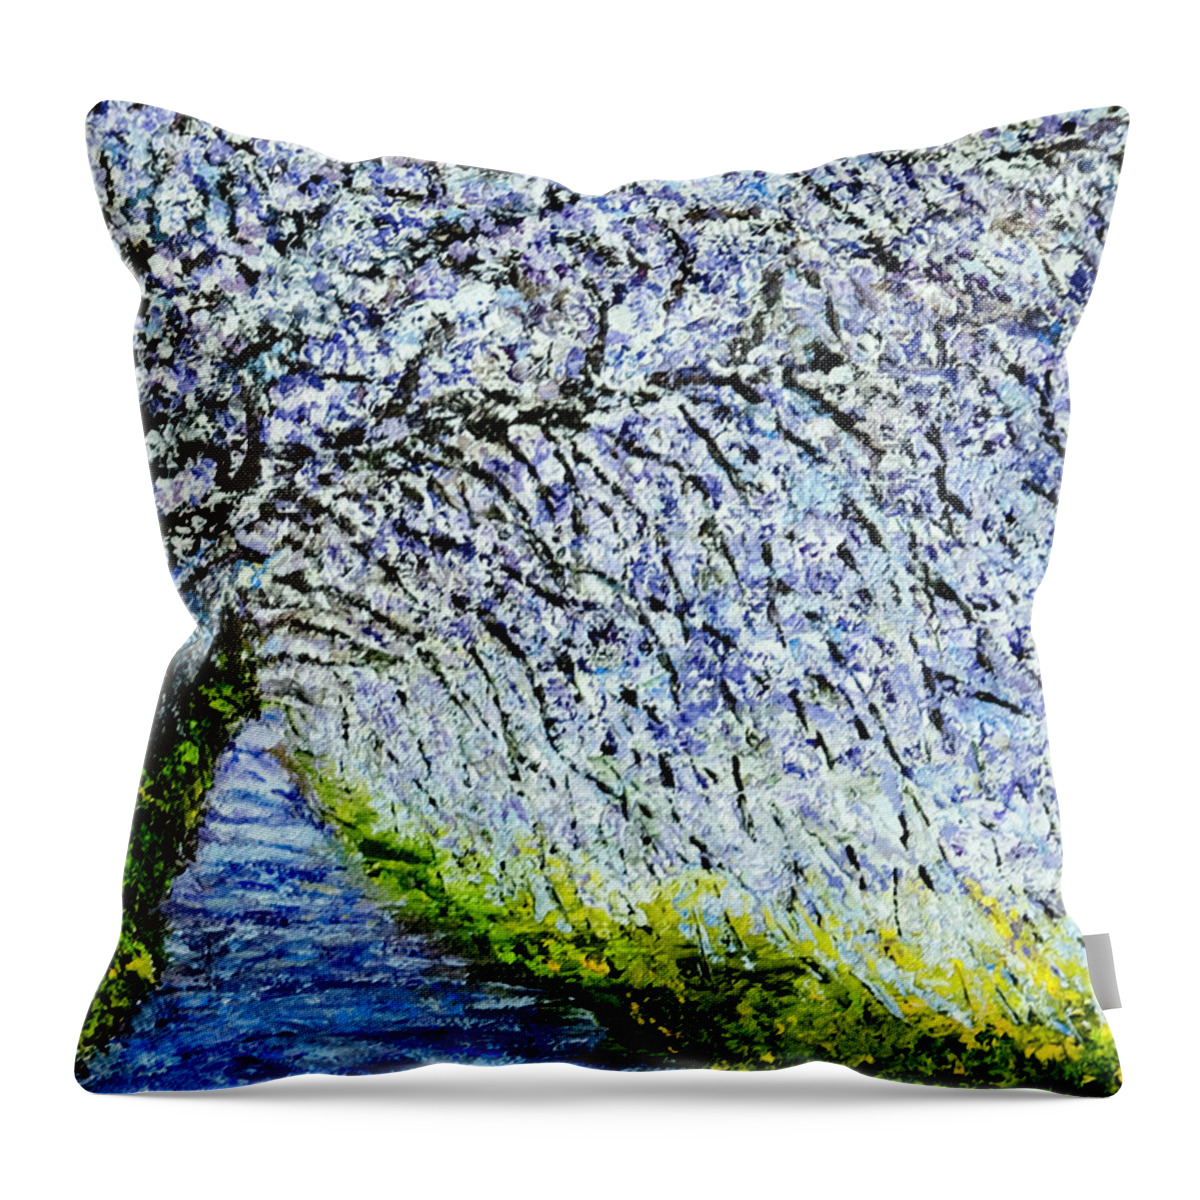 Impressionist Throw Pillow featuring the painting Flowering Tree Lane by Terry R MacDonald